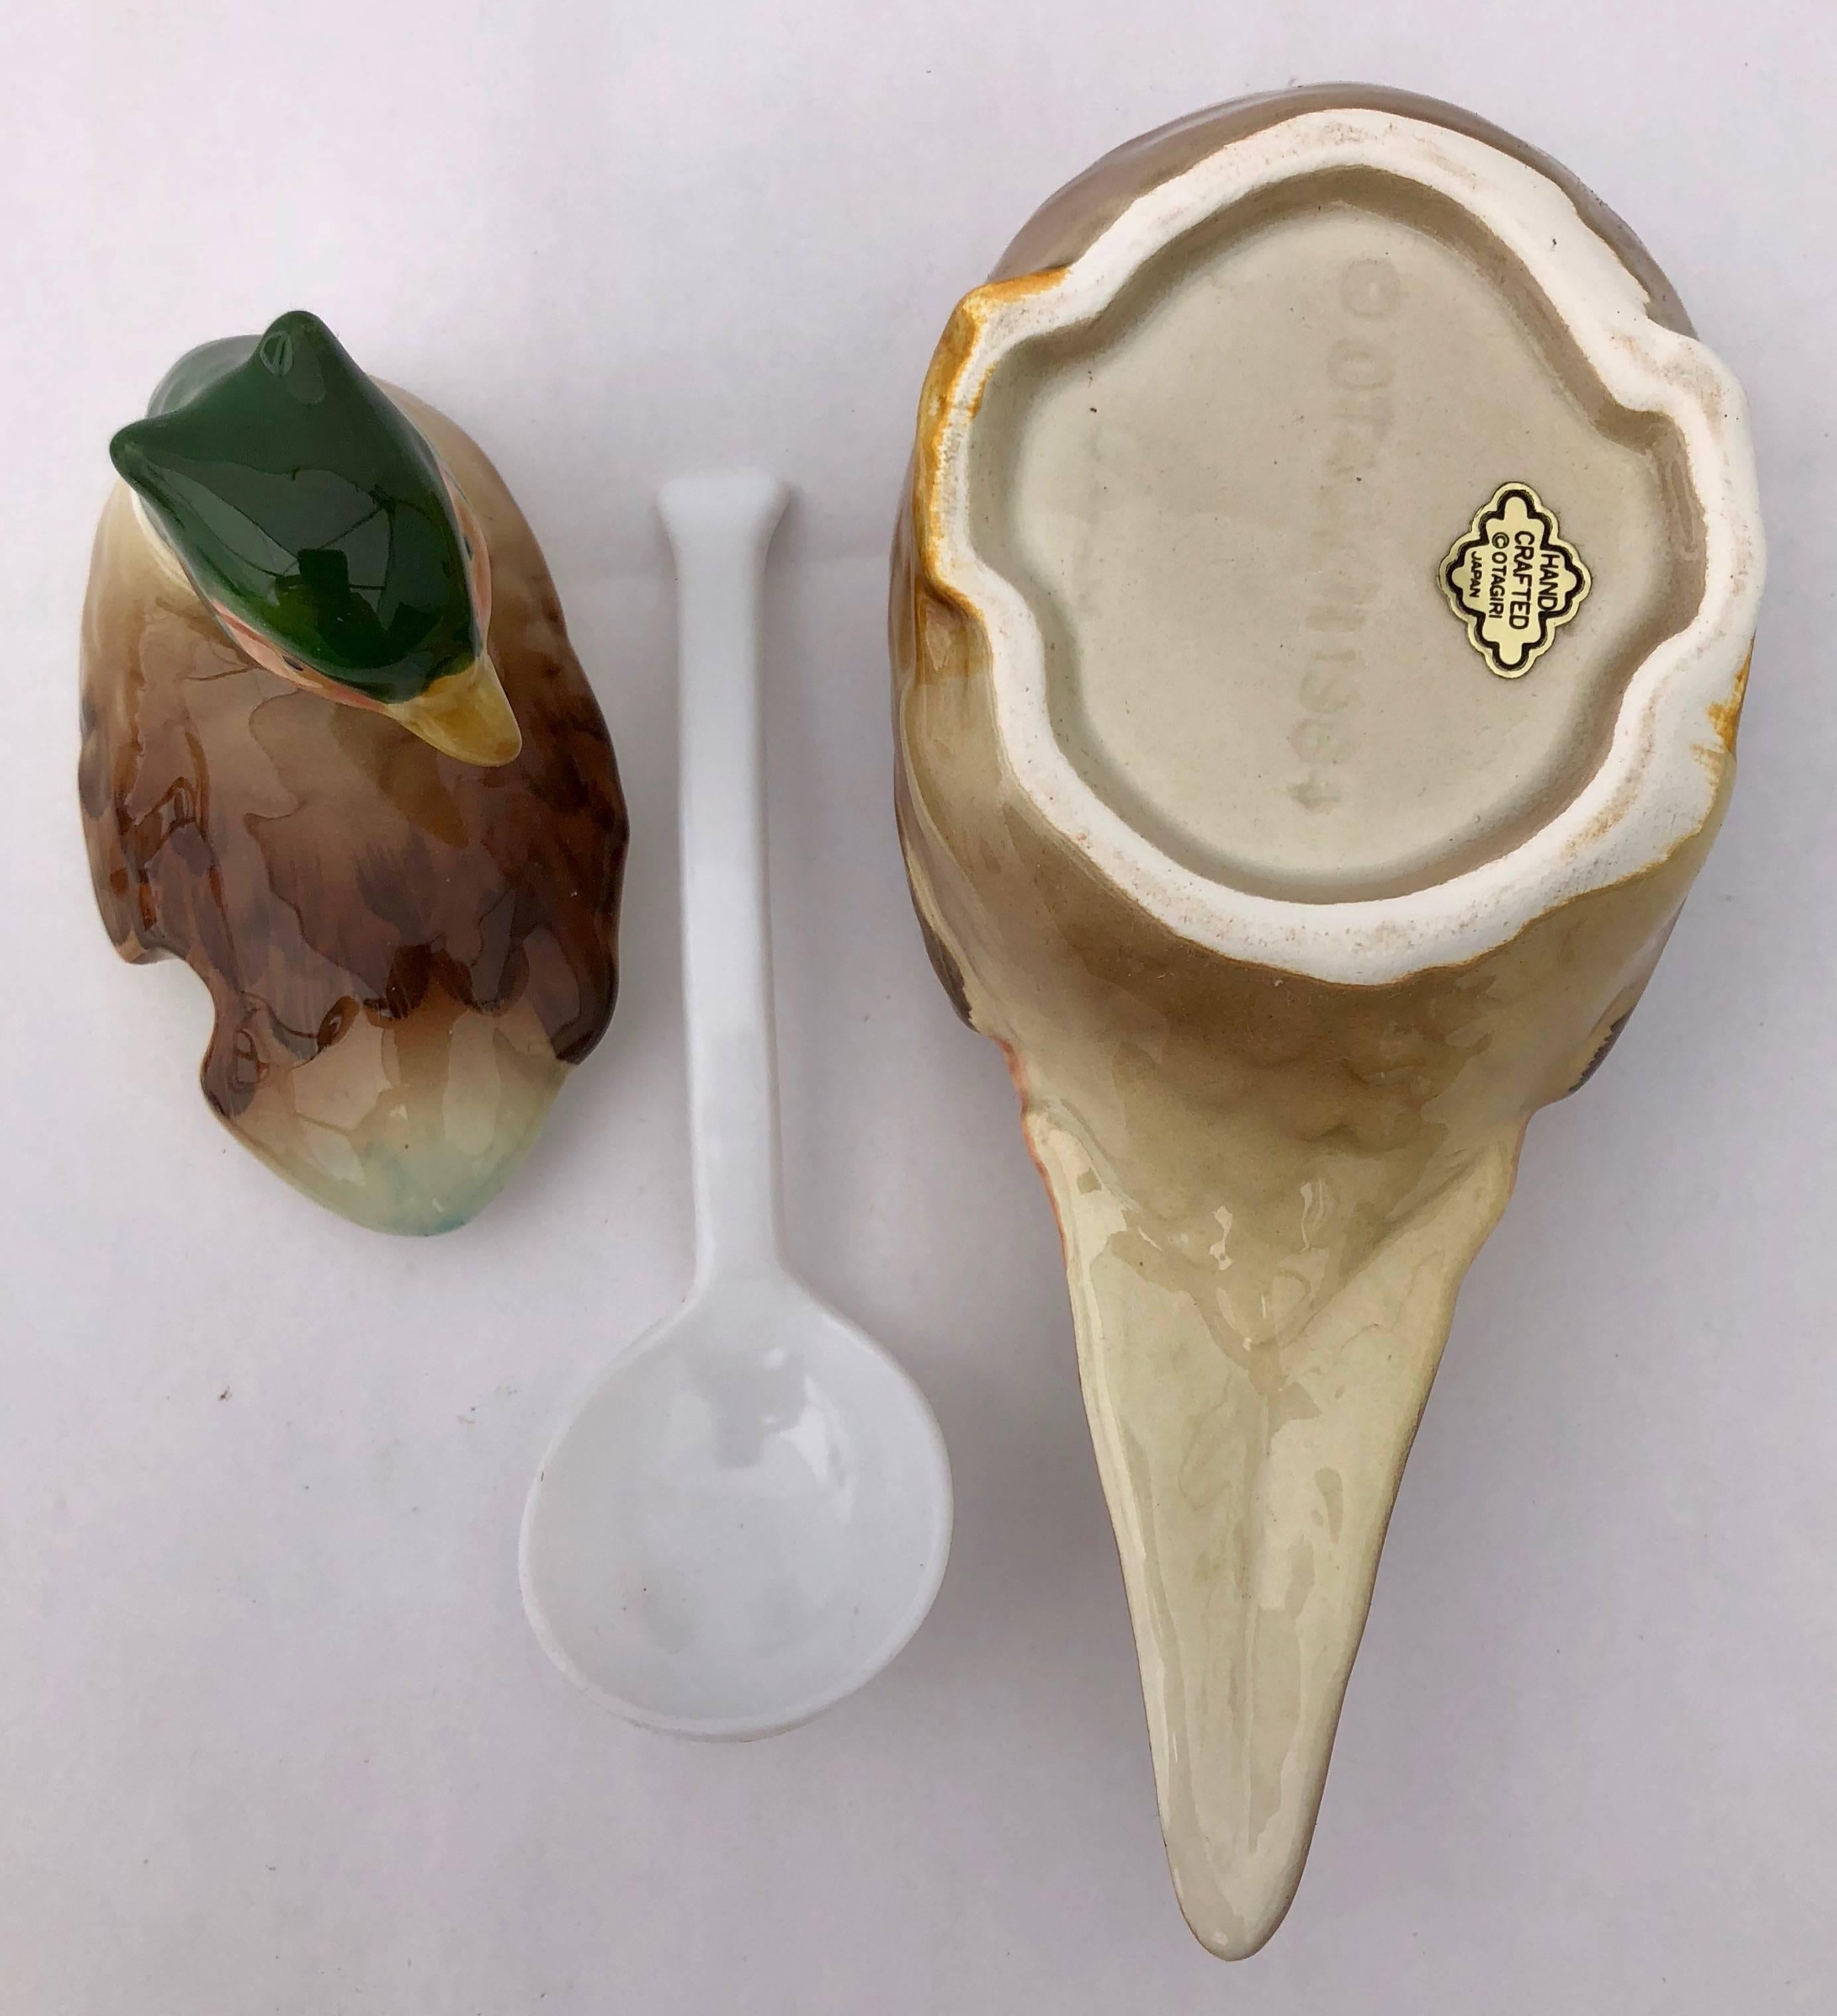 Three-Piece Handcrafted Ceramic Pheasant Condiment Bowl with Spoon by Otagiri In Excellent Condition For Sale In Petaluma, CA